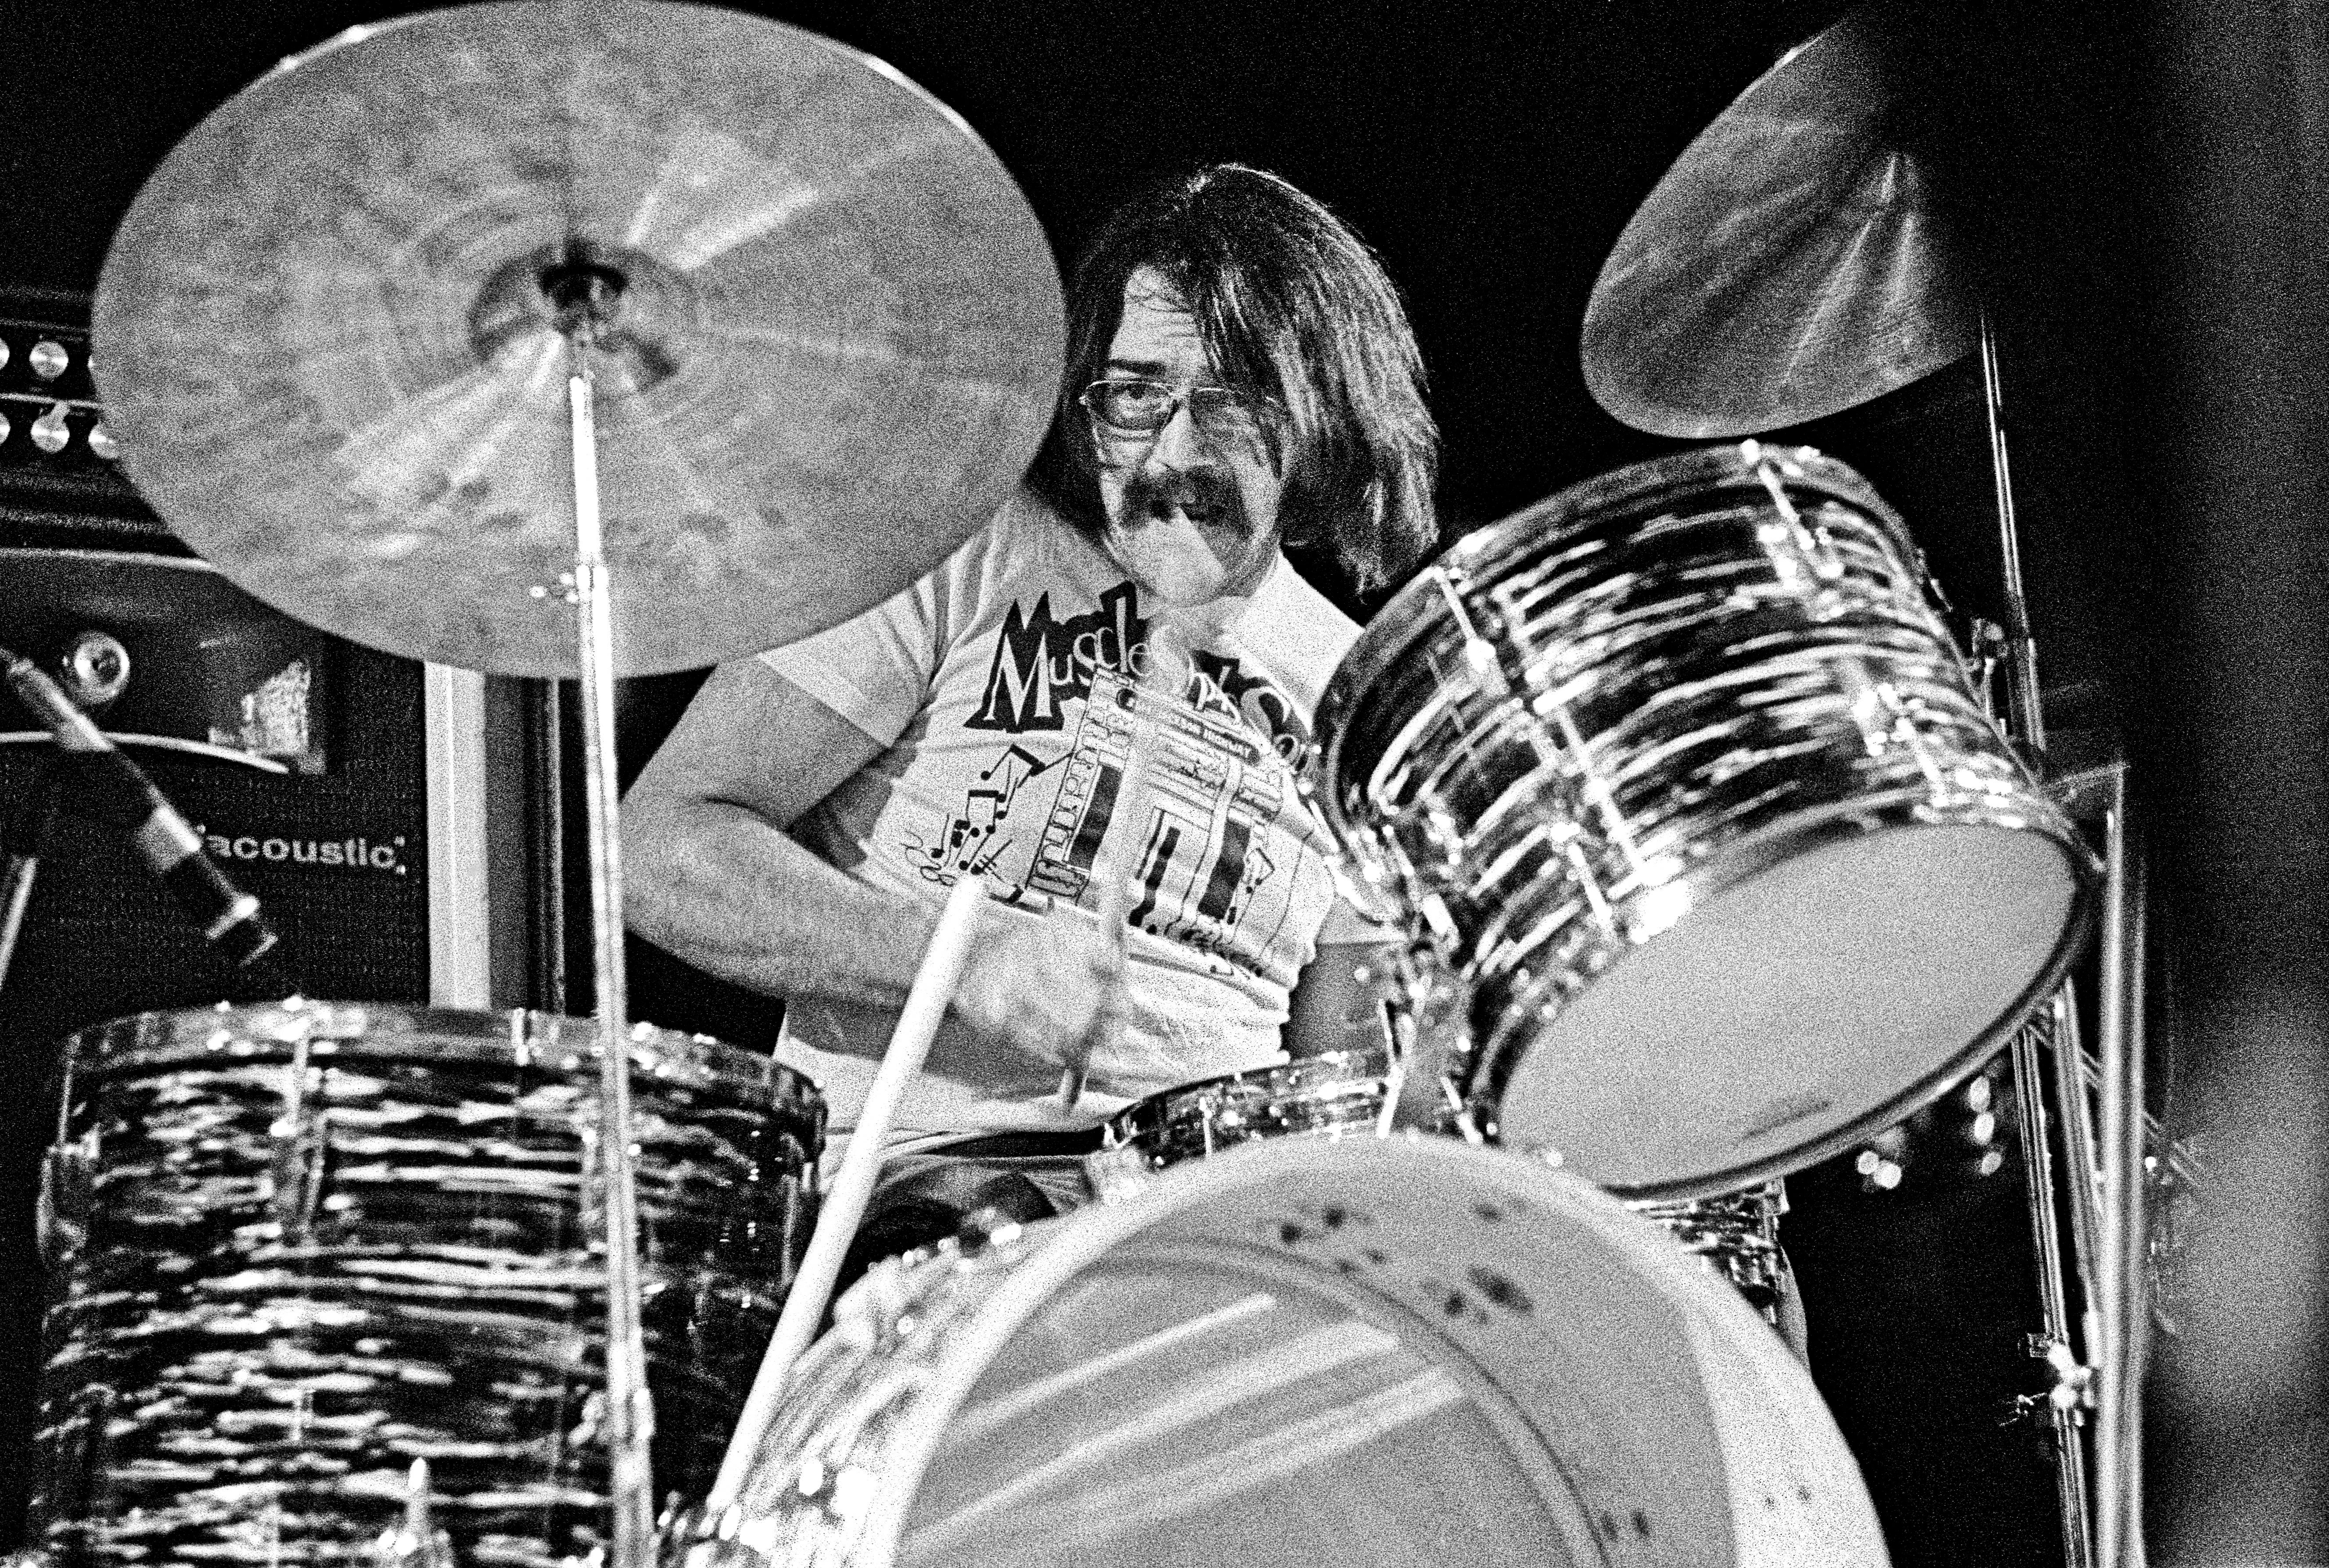 Muscle Shoals drummer Roger Hawkins on stage at Birmingham Town Hall in 1973 with Traffic